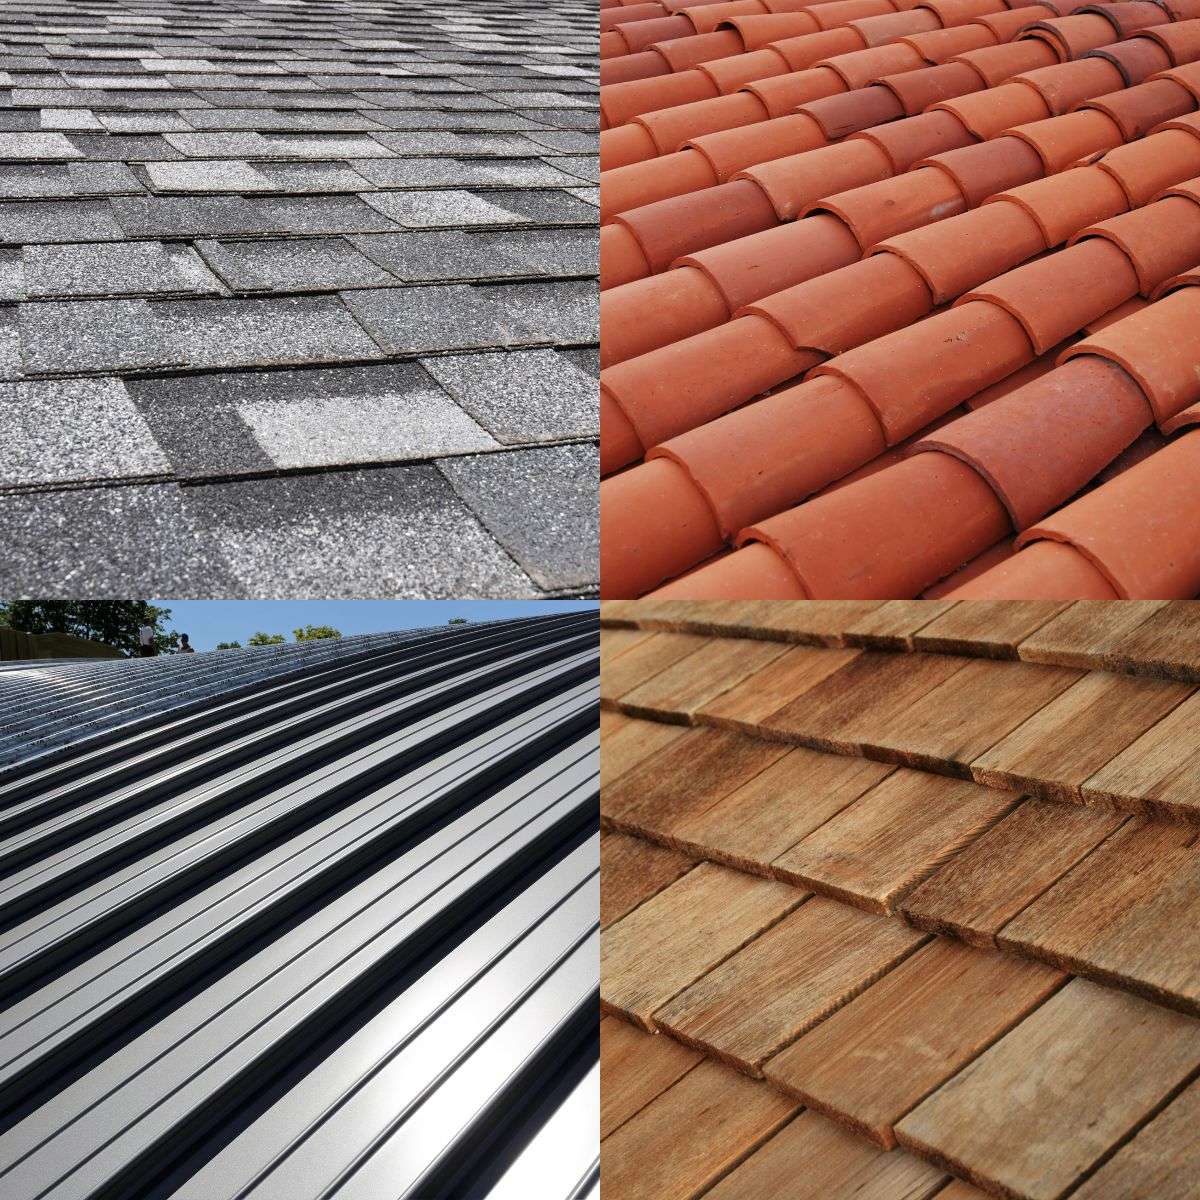 Roof Replacement Process - Materials